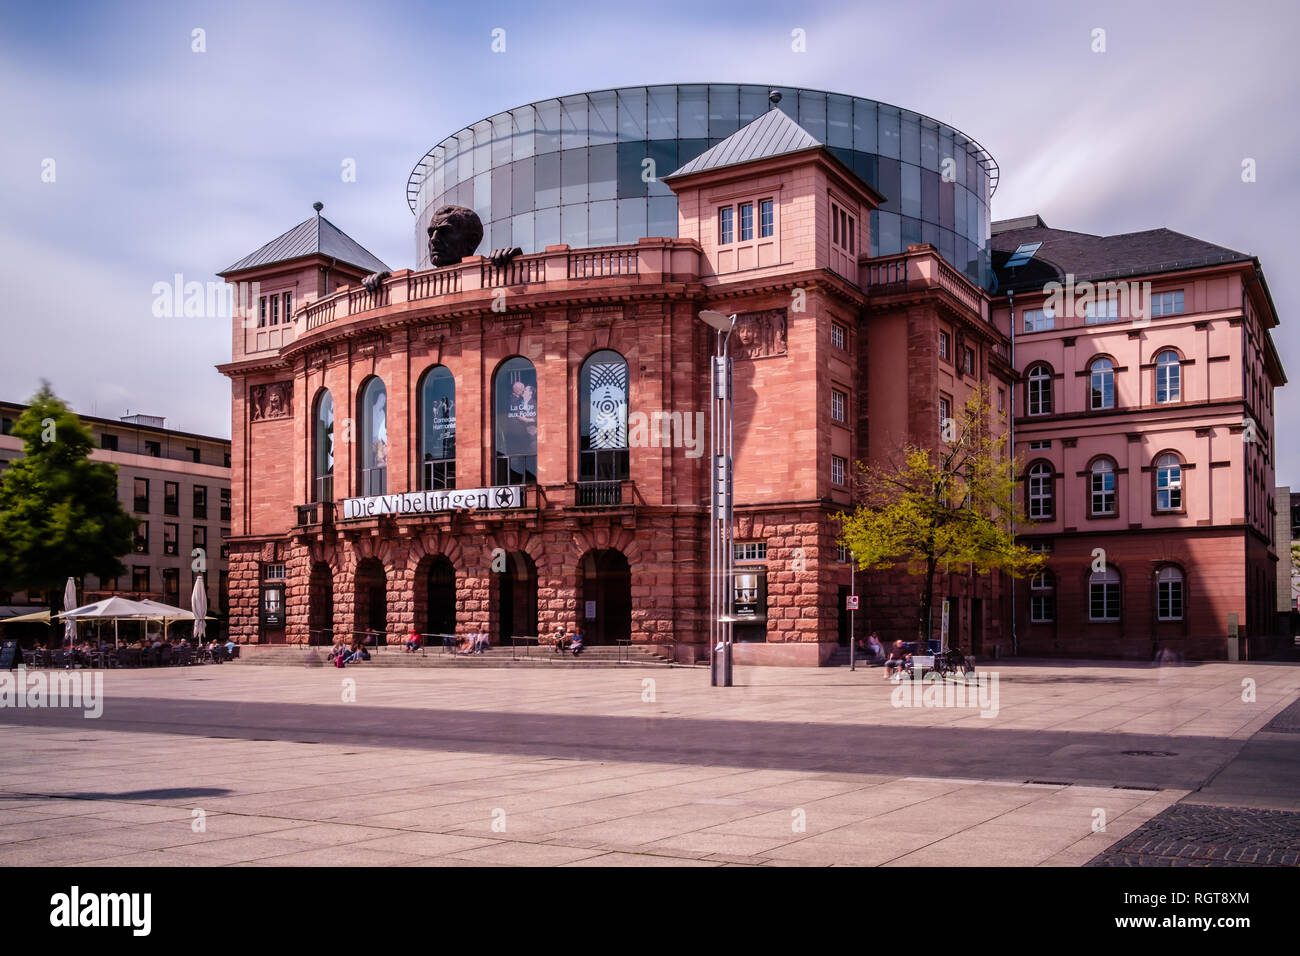 Mainz, Germany, May 21, 2018: state theater against blurred clouds Stock Photo